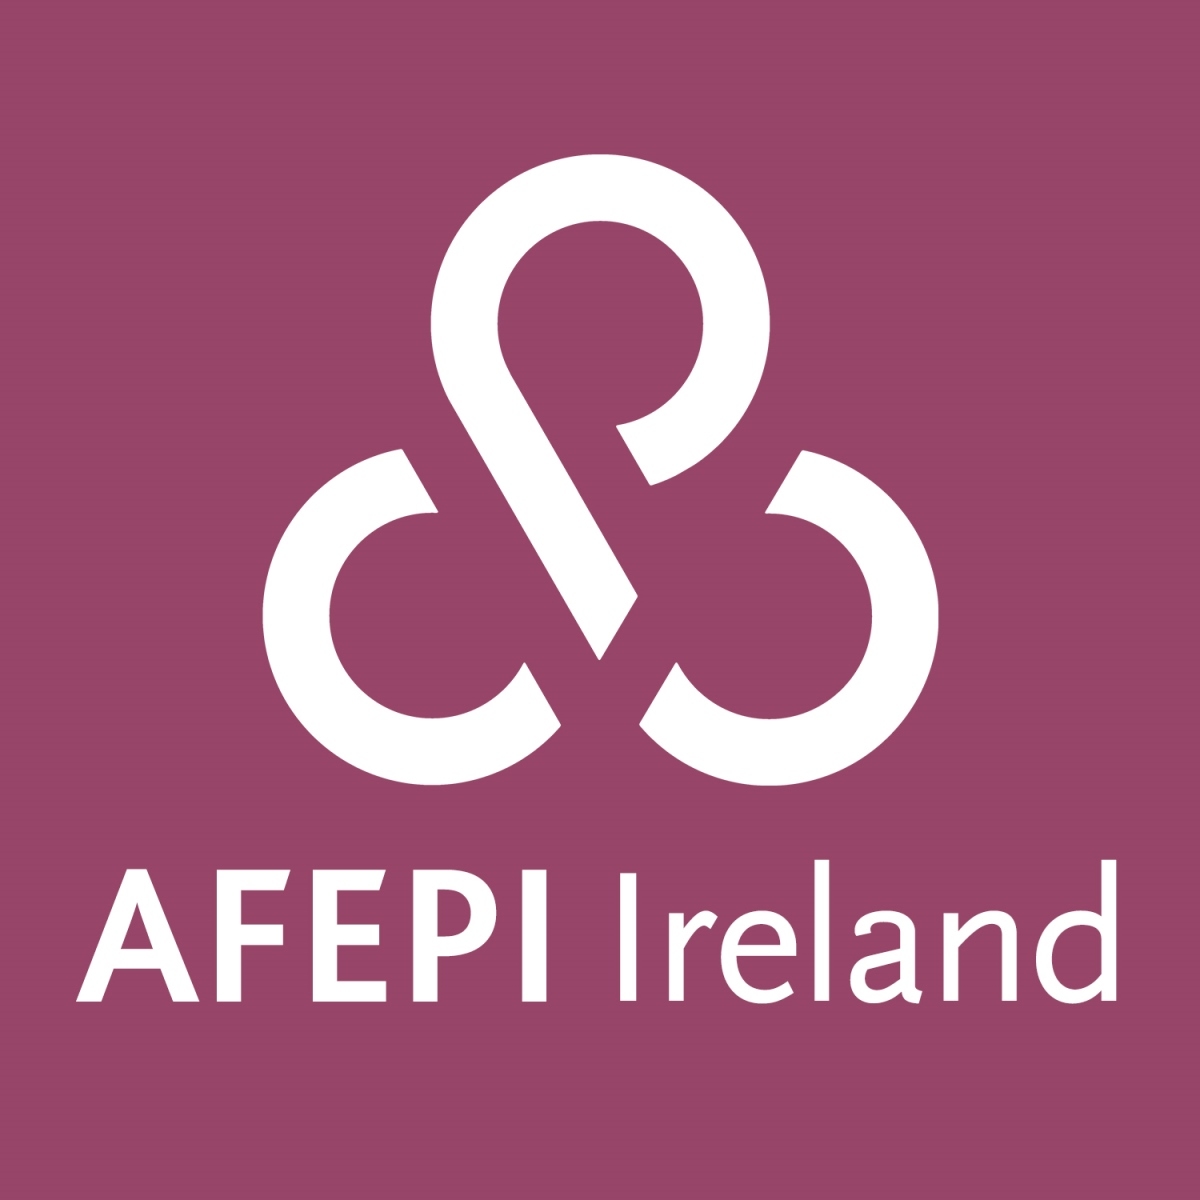 Association of Freelance Editors, Proofreaders and Indexers of Ireland